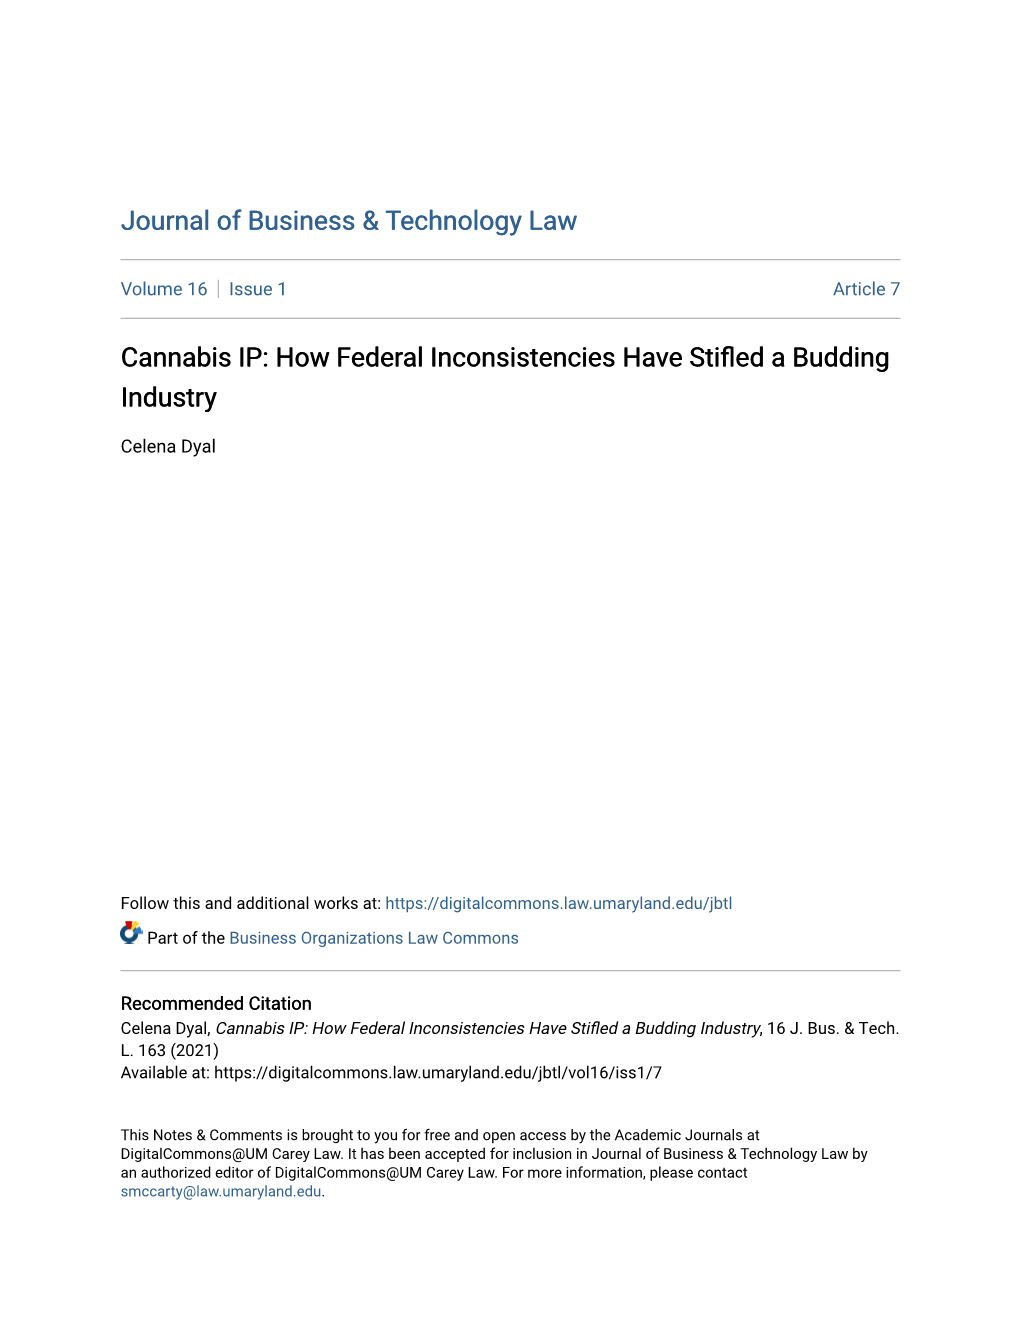 Cannabis IP: How Federal Inconsistencies Have Stifled a Budding Industry